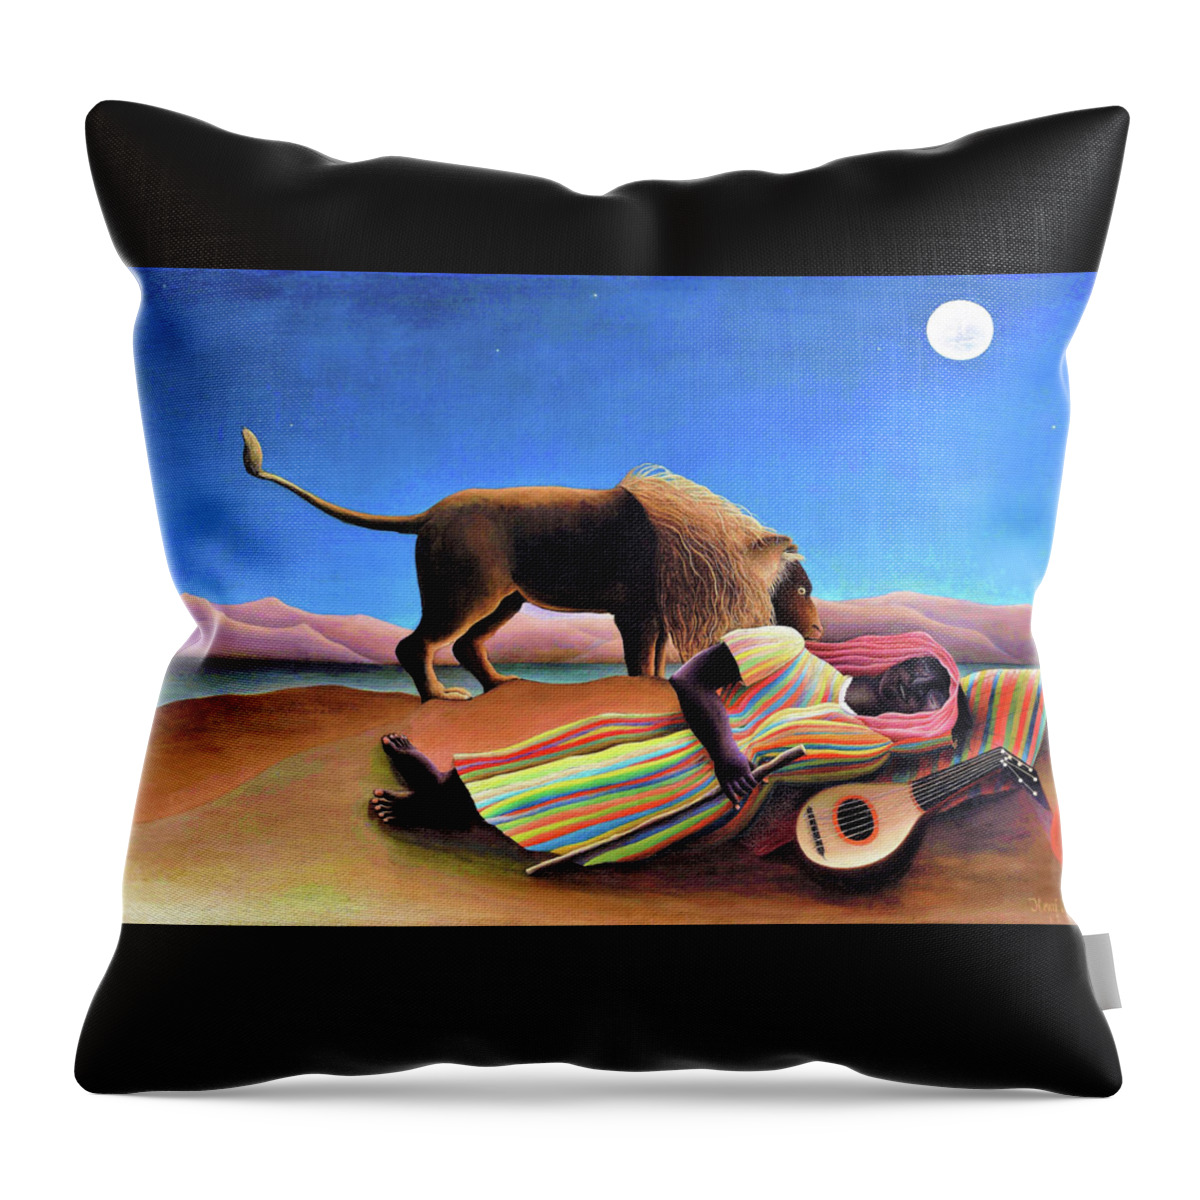 Henri Rousseau Throw Pillow featuring the painting The Sleeping Gypsy - Digital Remastered Edition by Henri Rousseau